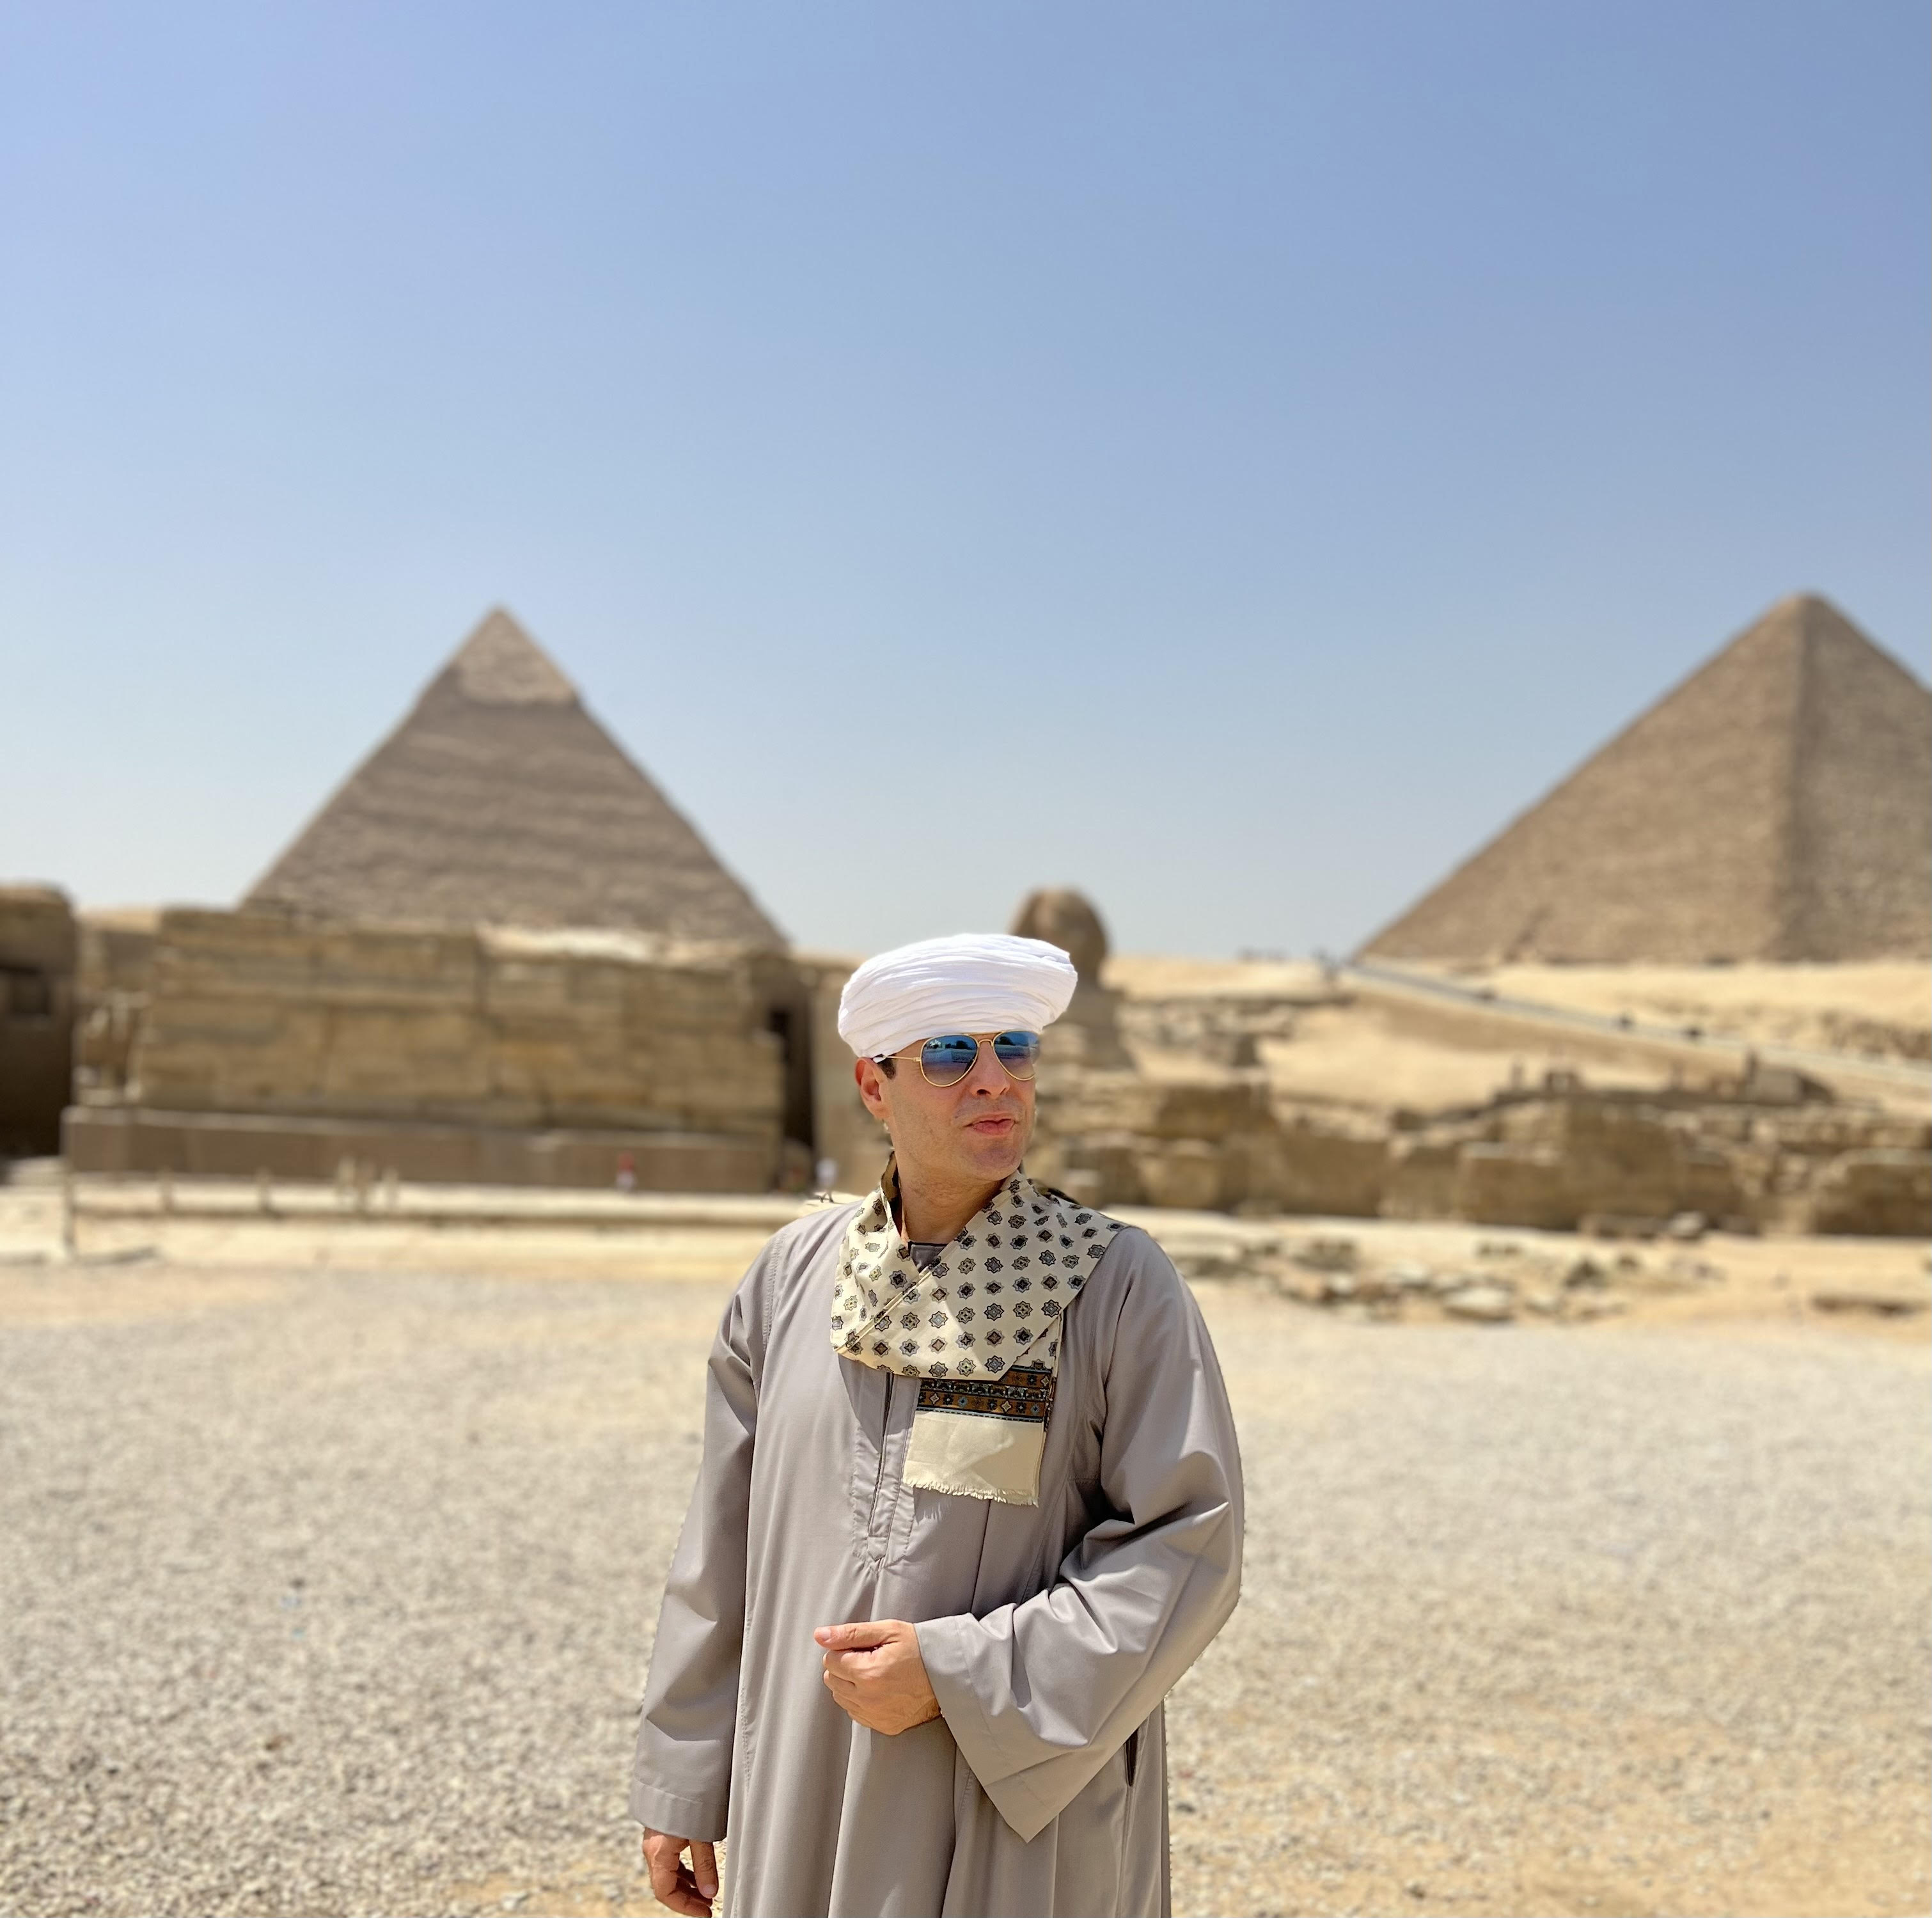 Abu Dhabi Festival Presents The First Ever ‘Inshad’ Concert Of Its Kind At The Great Pyramids Of Giza By Renowned Chanter Sheikh Mahmoud El Tohamy